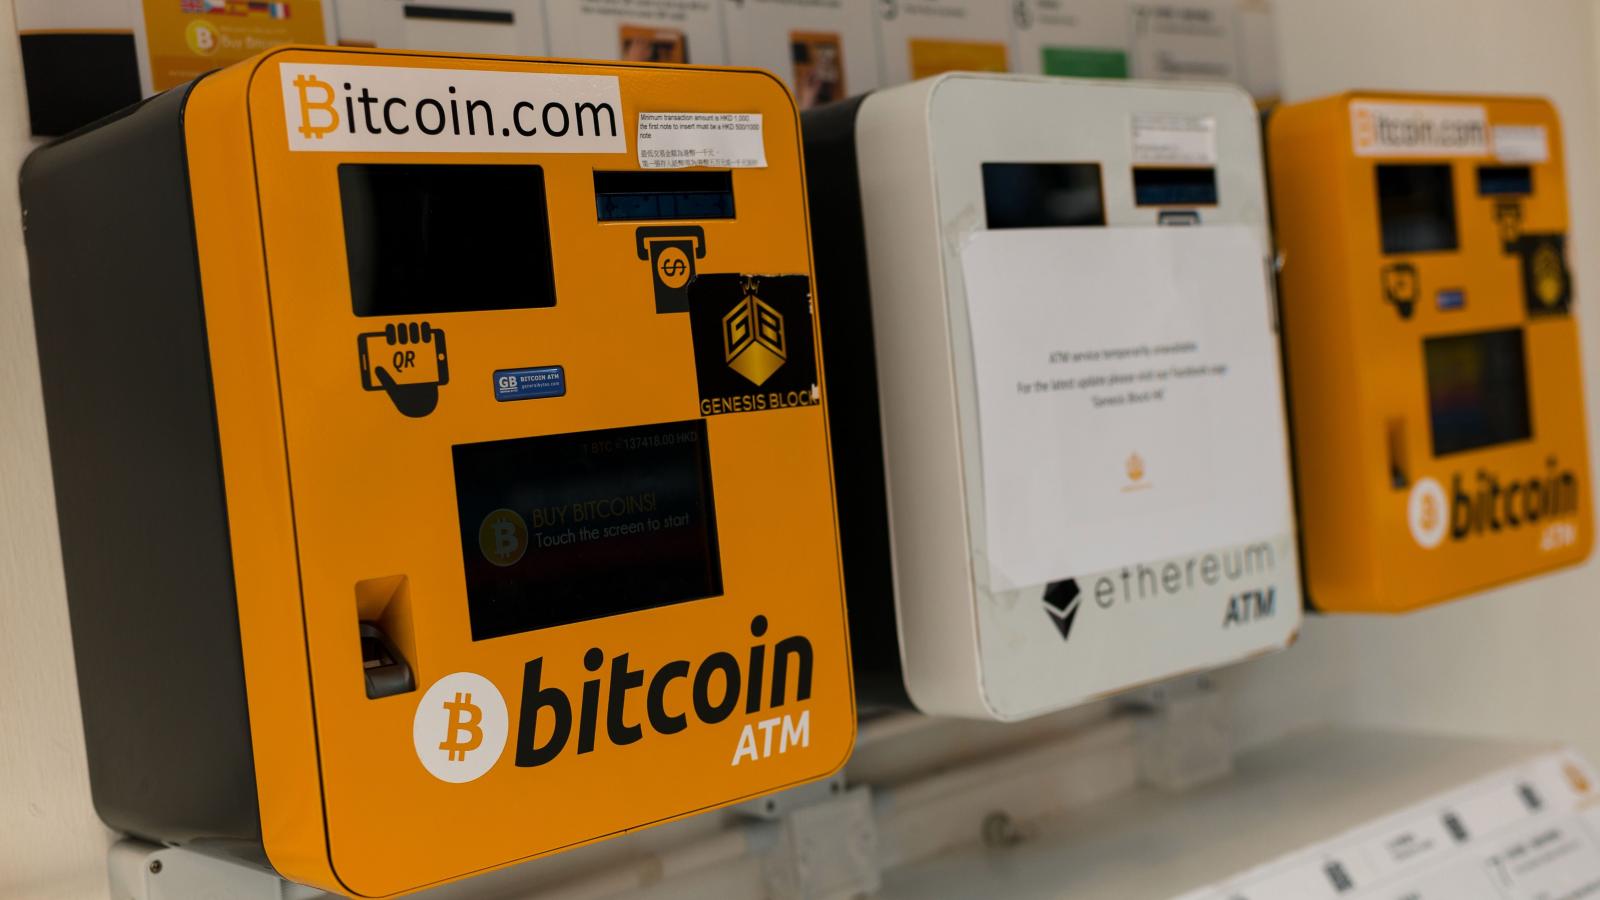 Bitcoin of three bitcoin ATMs mounted side by side on the wall